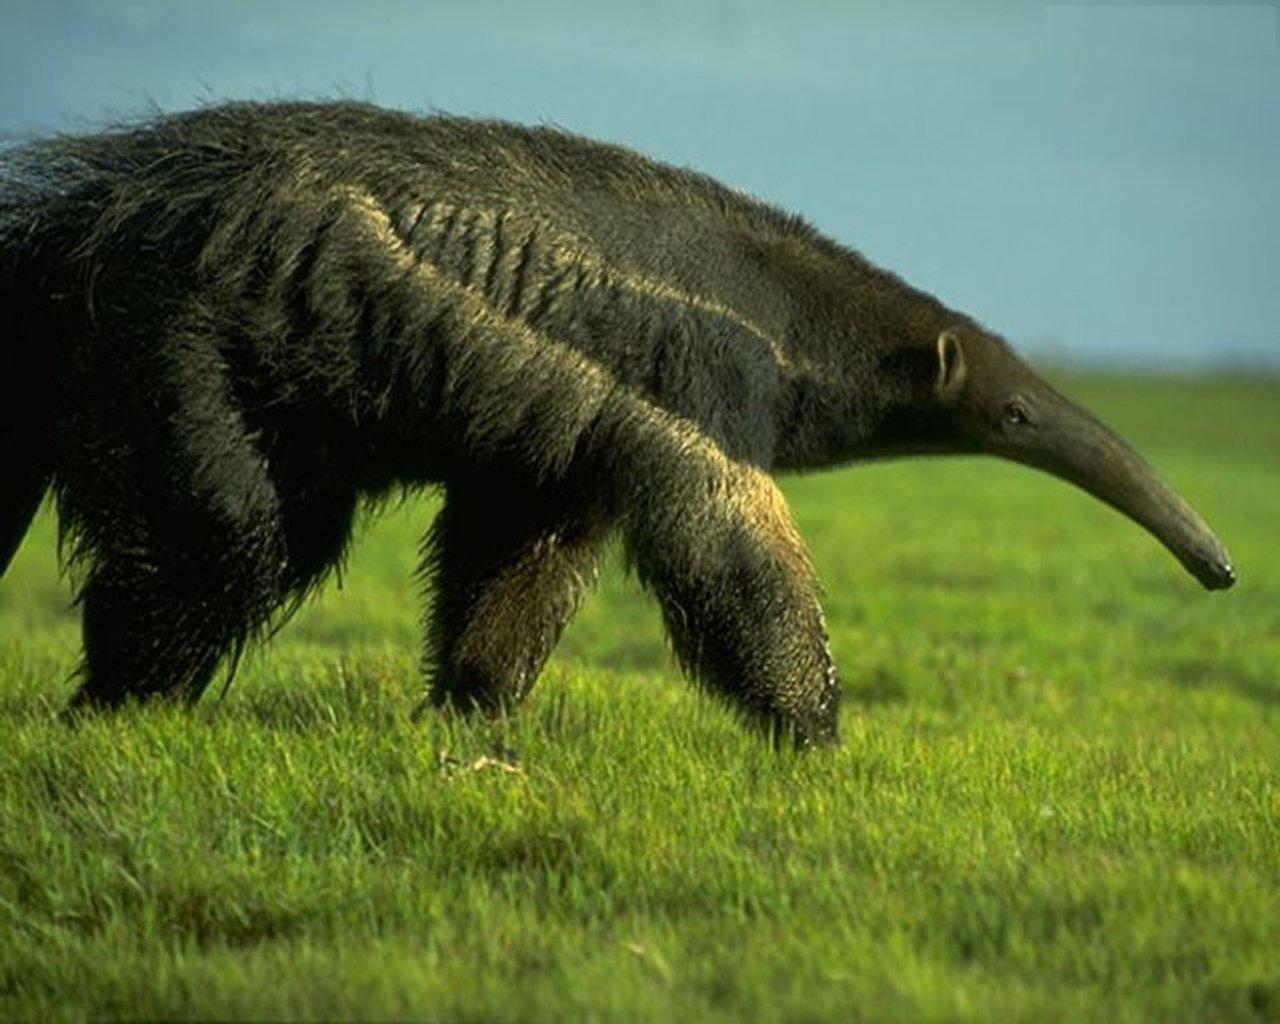 A Giant Anteater looking for food